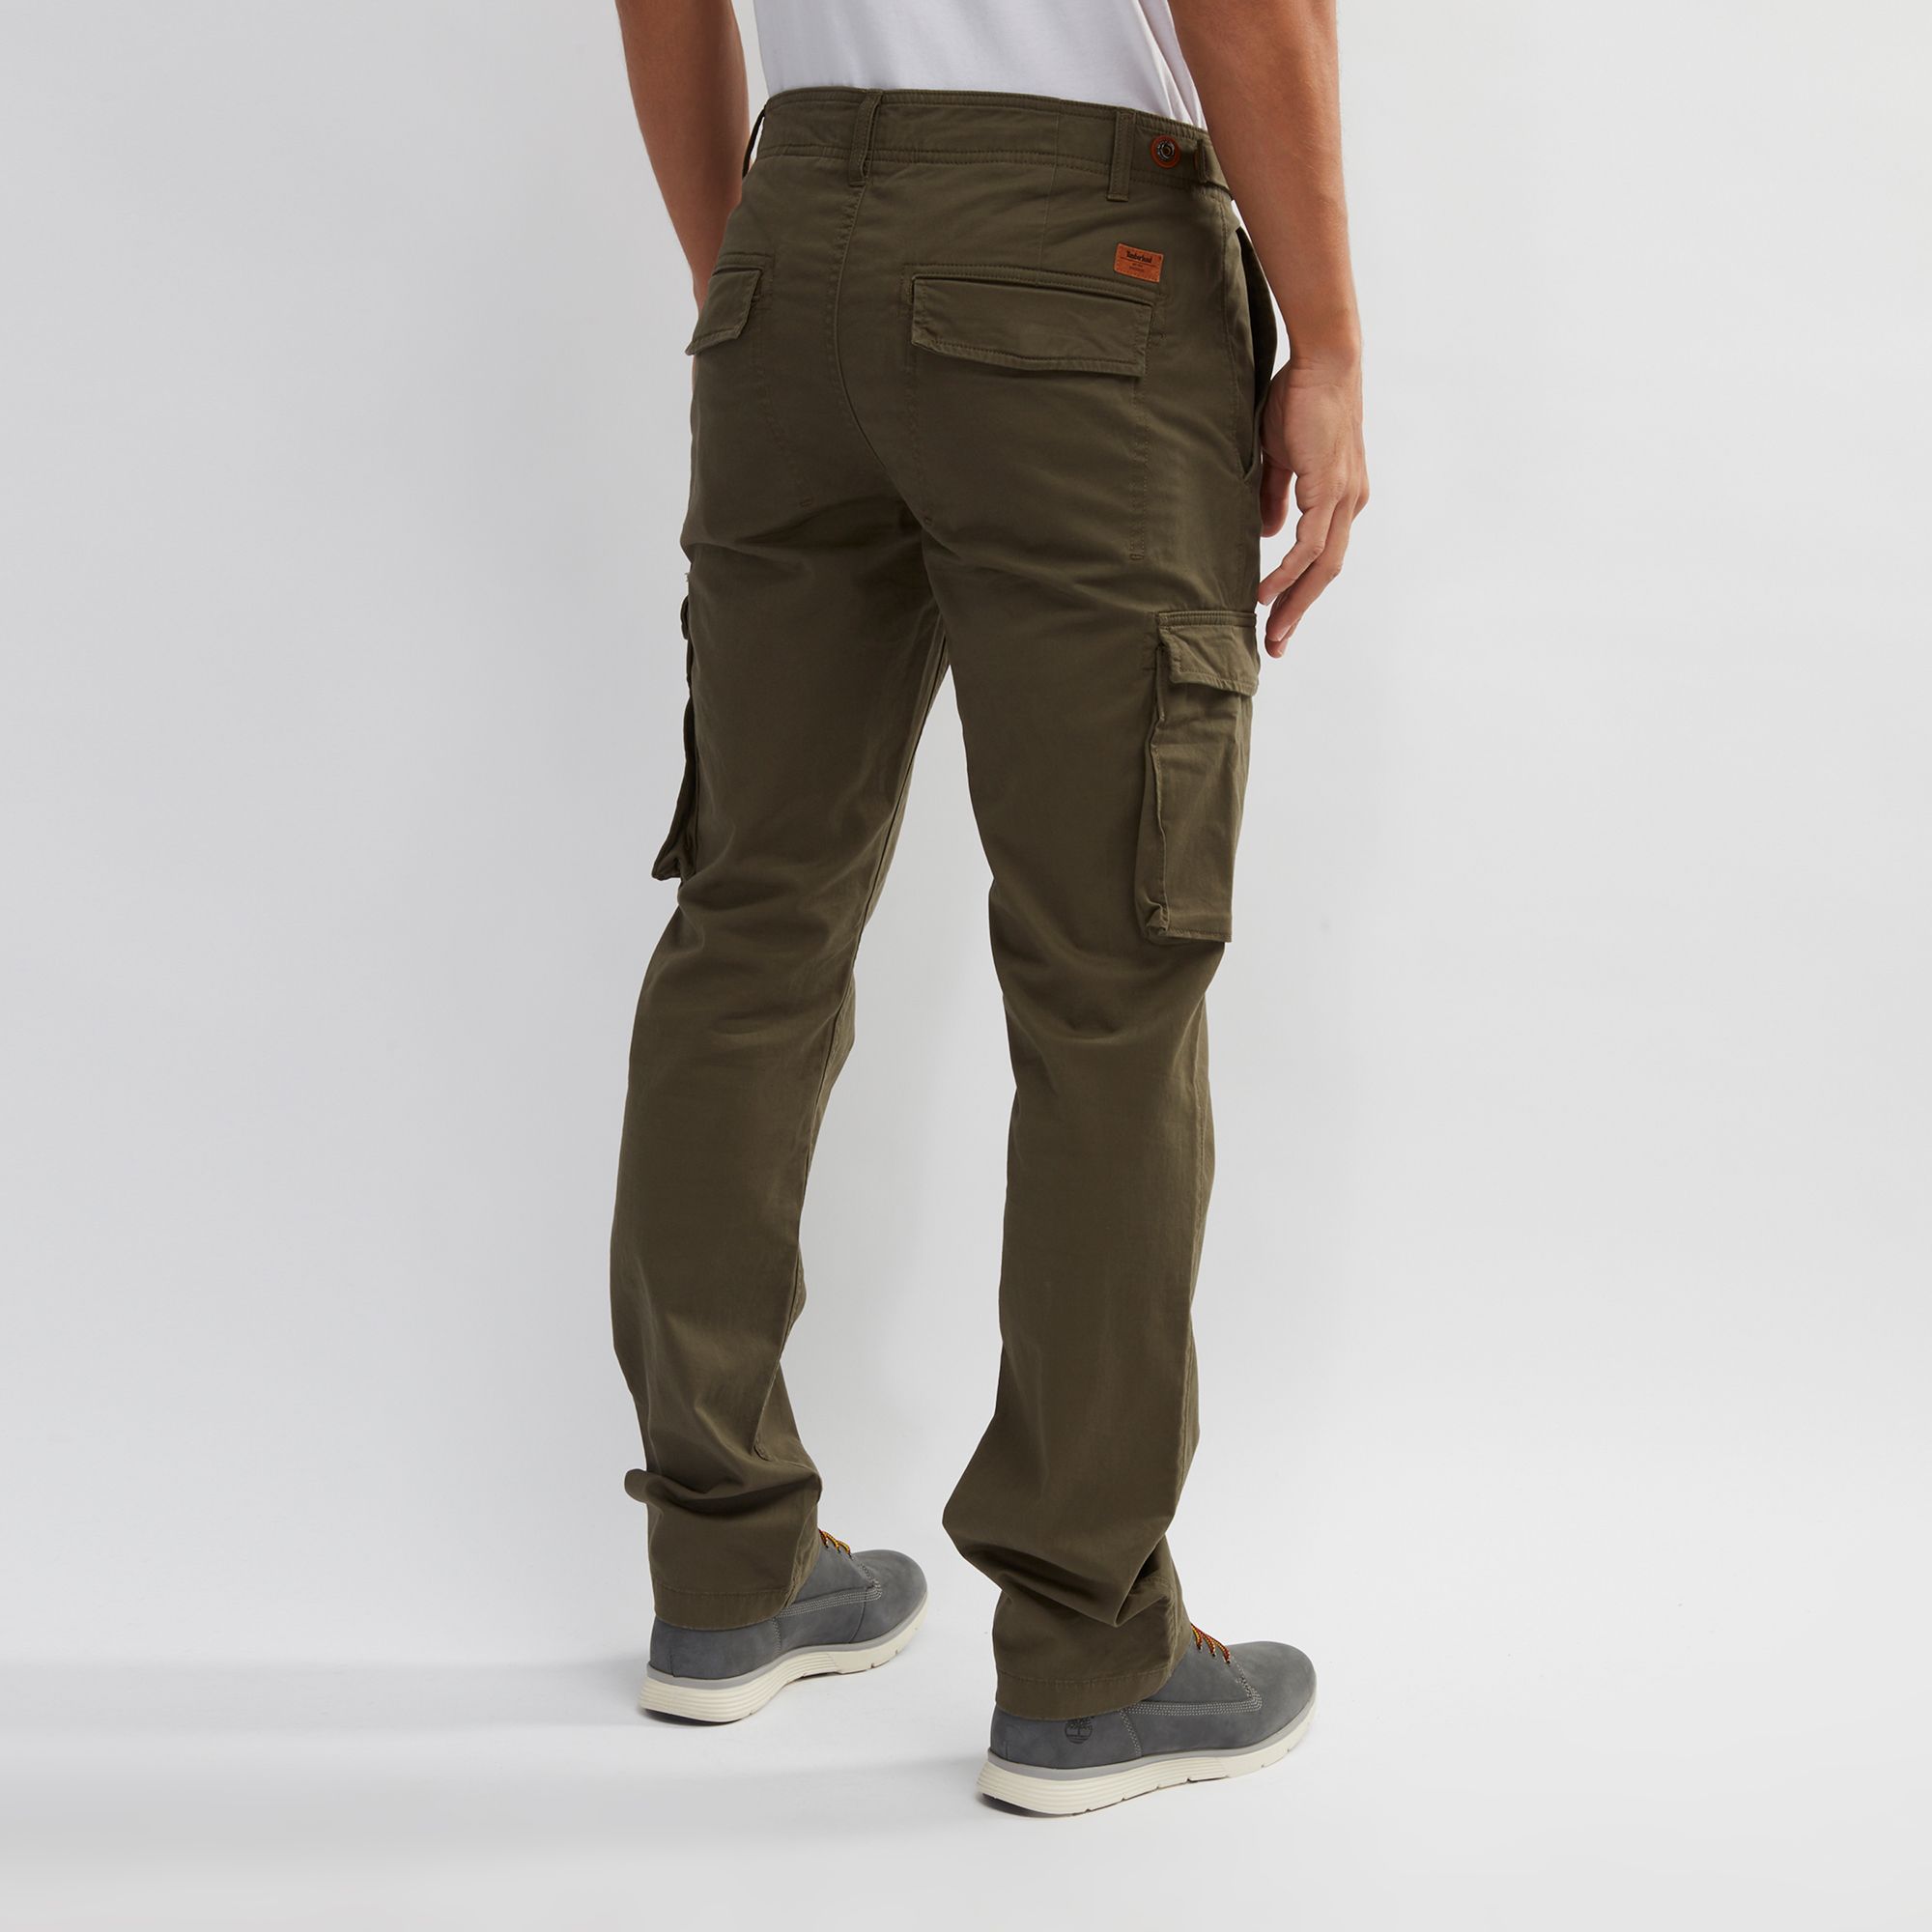 Shop Green Timberland Squam Lake Cargo Pants for Mens by Timberland | SSS